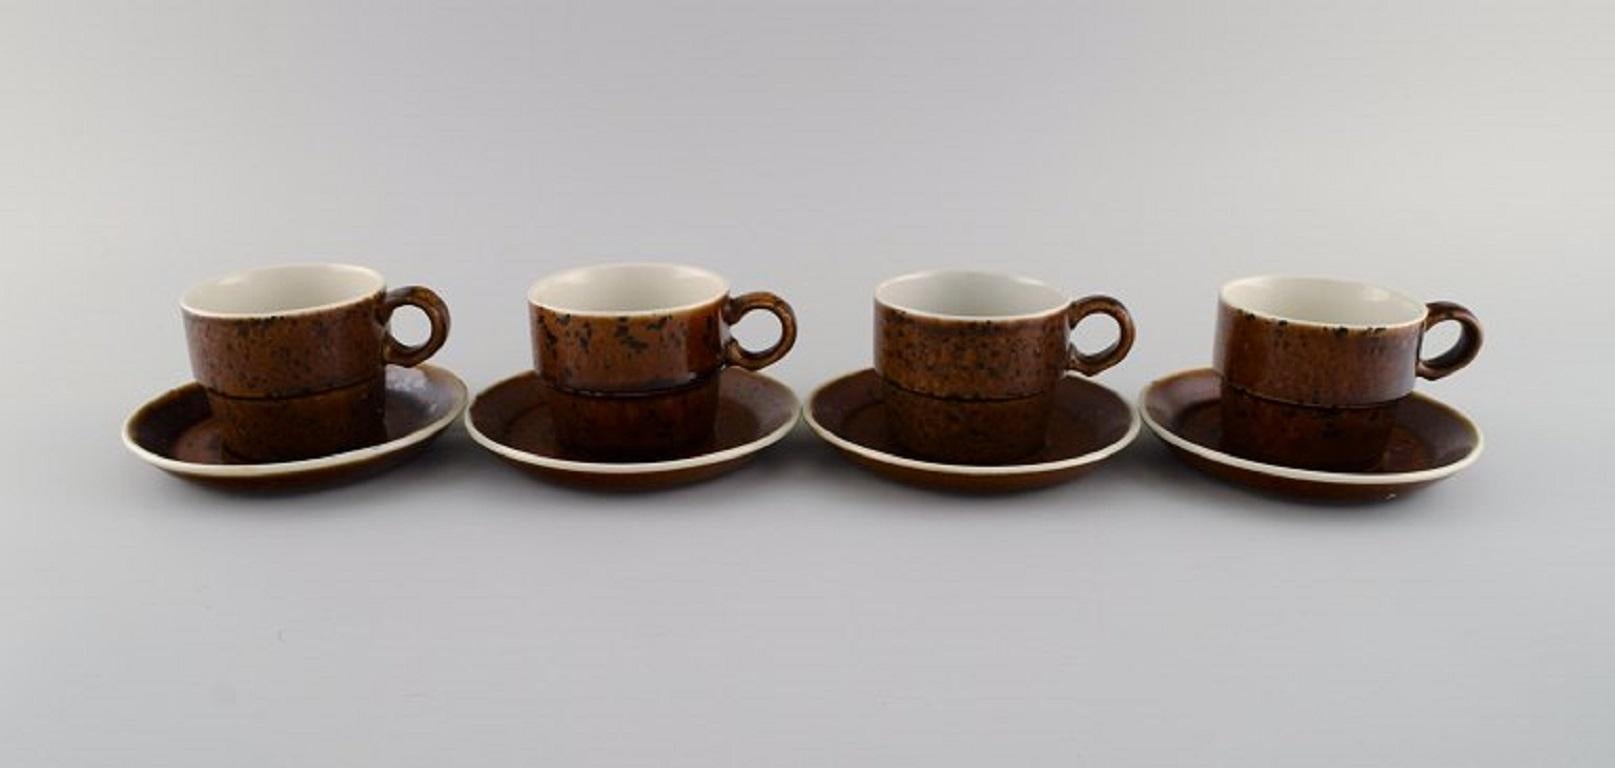 Stig Lindberg for Gustavsberg. 
Twelve Coq coffee cups with saucers in glazed stoneware. Beautiful glaze in brown shades. Swedish design, 1960s.
The cup measures: 7.5 x 6 cm.
Saucer diameter: 13 cm.
In excellent condition.
Stamped.